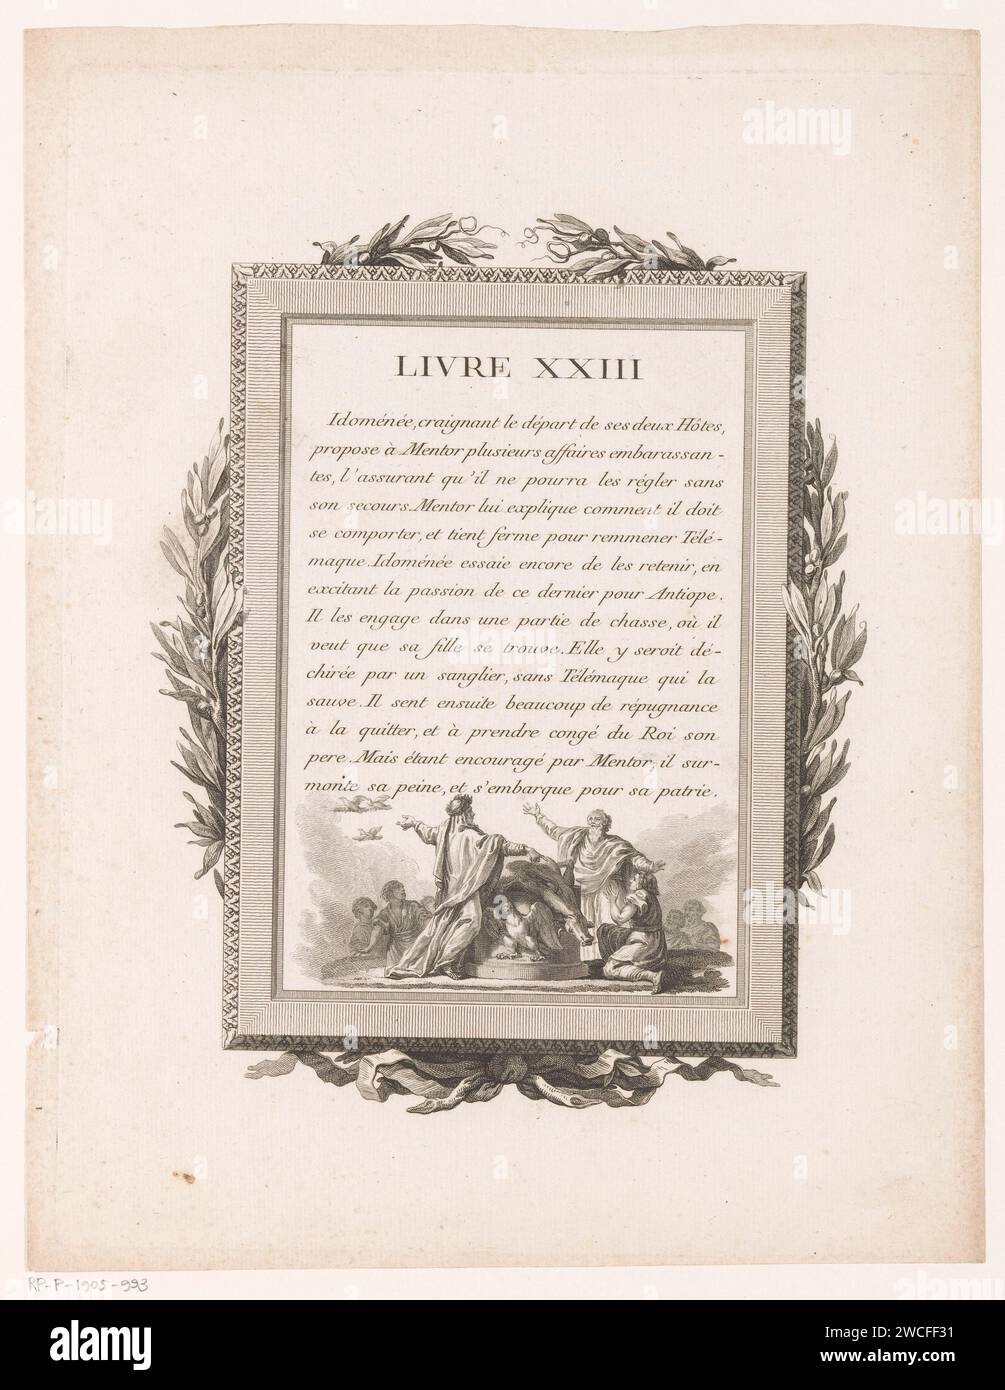 Framed French text with olive branches and a group of sacrificing figures, Jean-Baptiste Tilliard, 1785 print Four -time French text, entitled 'Livre XXIII' with an image of a group of figures around an altar for Jupiter, with a dead cow on it. The whole is framed by a decorative frame with olive branches and a bow at the bottom. print maker: Francepublisher: Parispublisher: Parispublisher: Parispublisher: Parispublisher: Paris paper etching / engraving (FENELON, Telemachus) specific works of literature (with AUTHOR, Title). animal sacrifice  non-Christian religions. ornament  festoon, garla Stock Photo